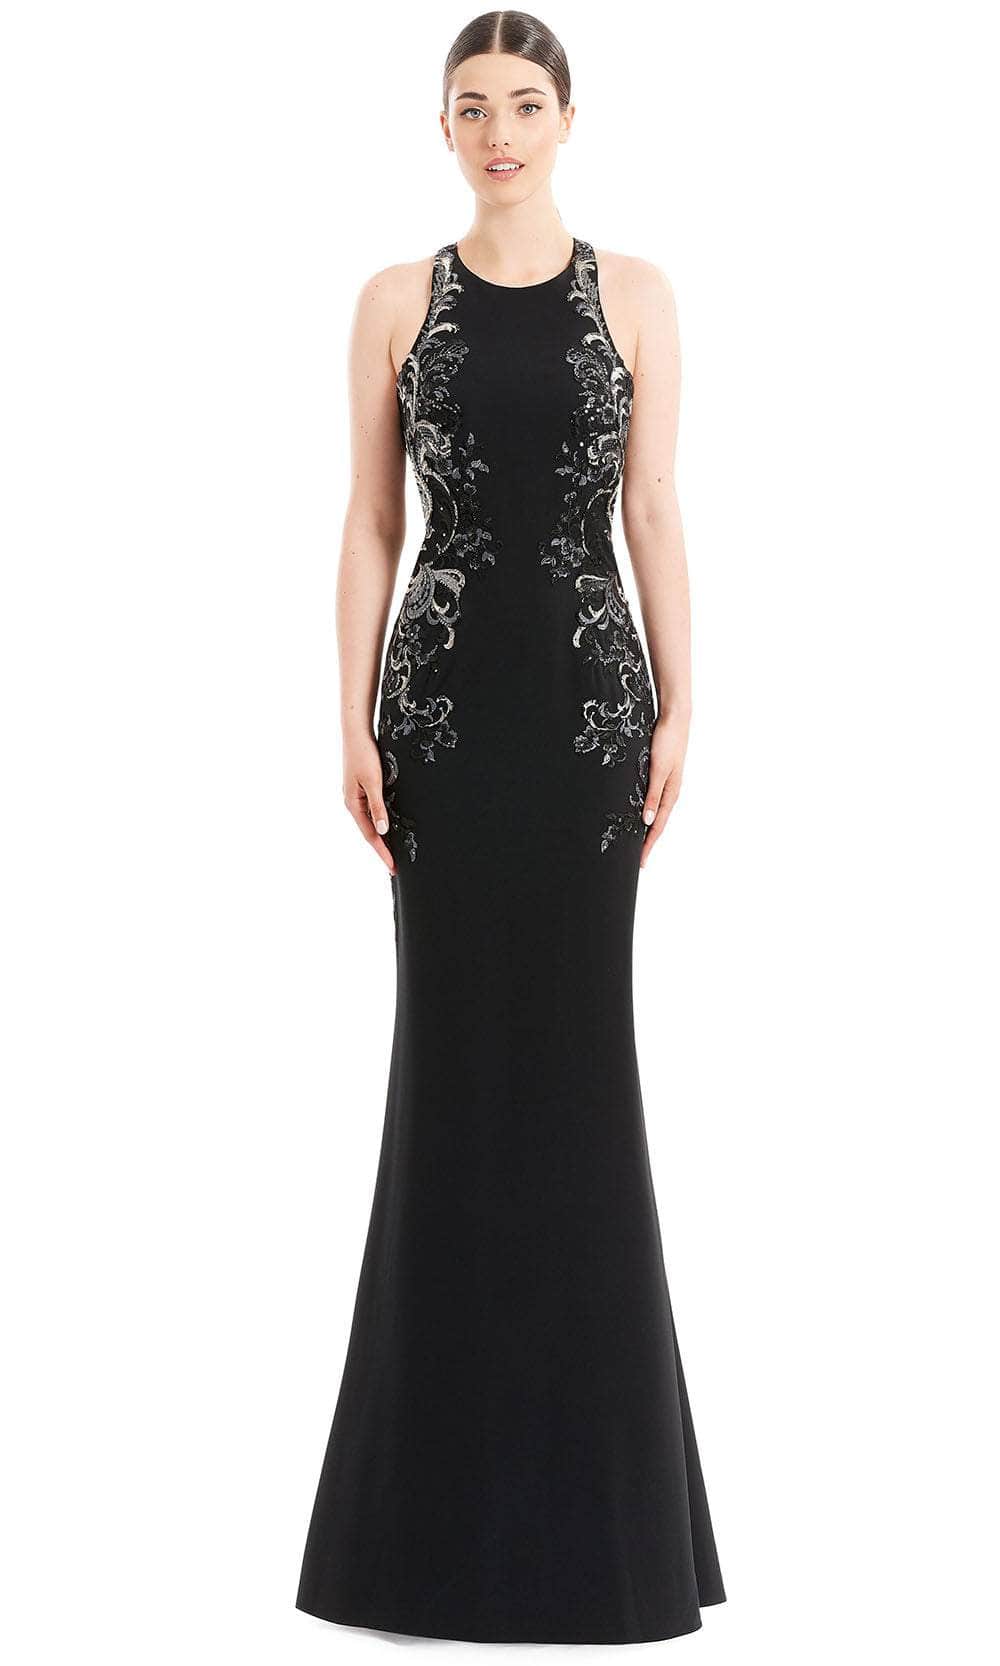 Image of Alexander by Daymor 1665 - Illusion Back Evening Gown